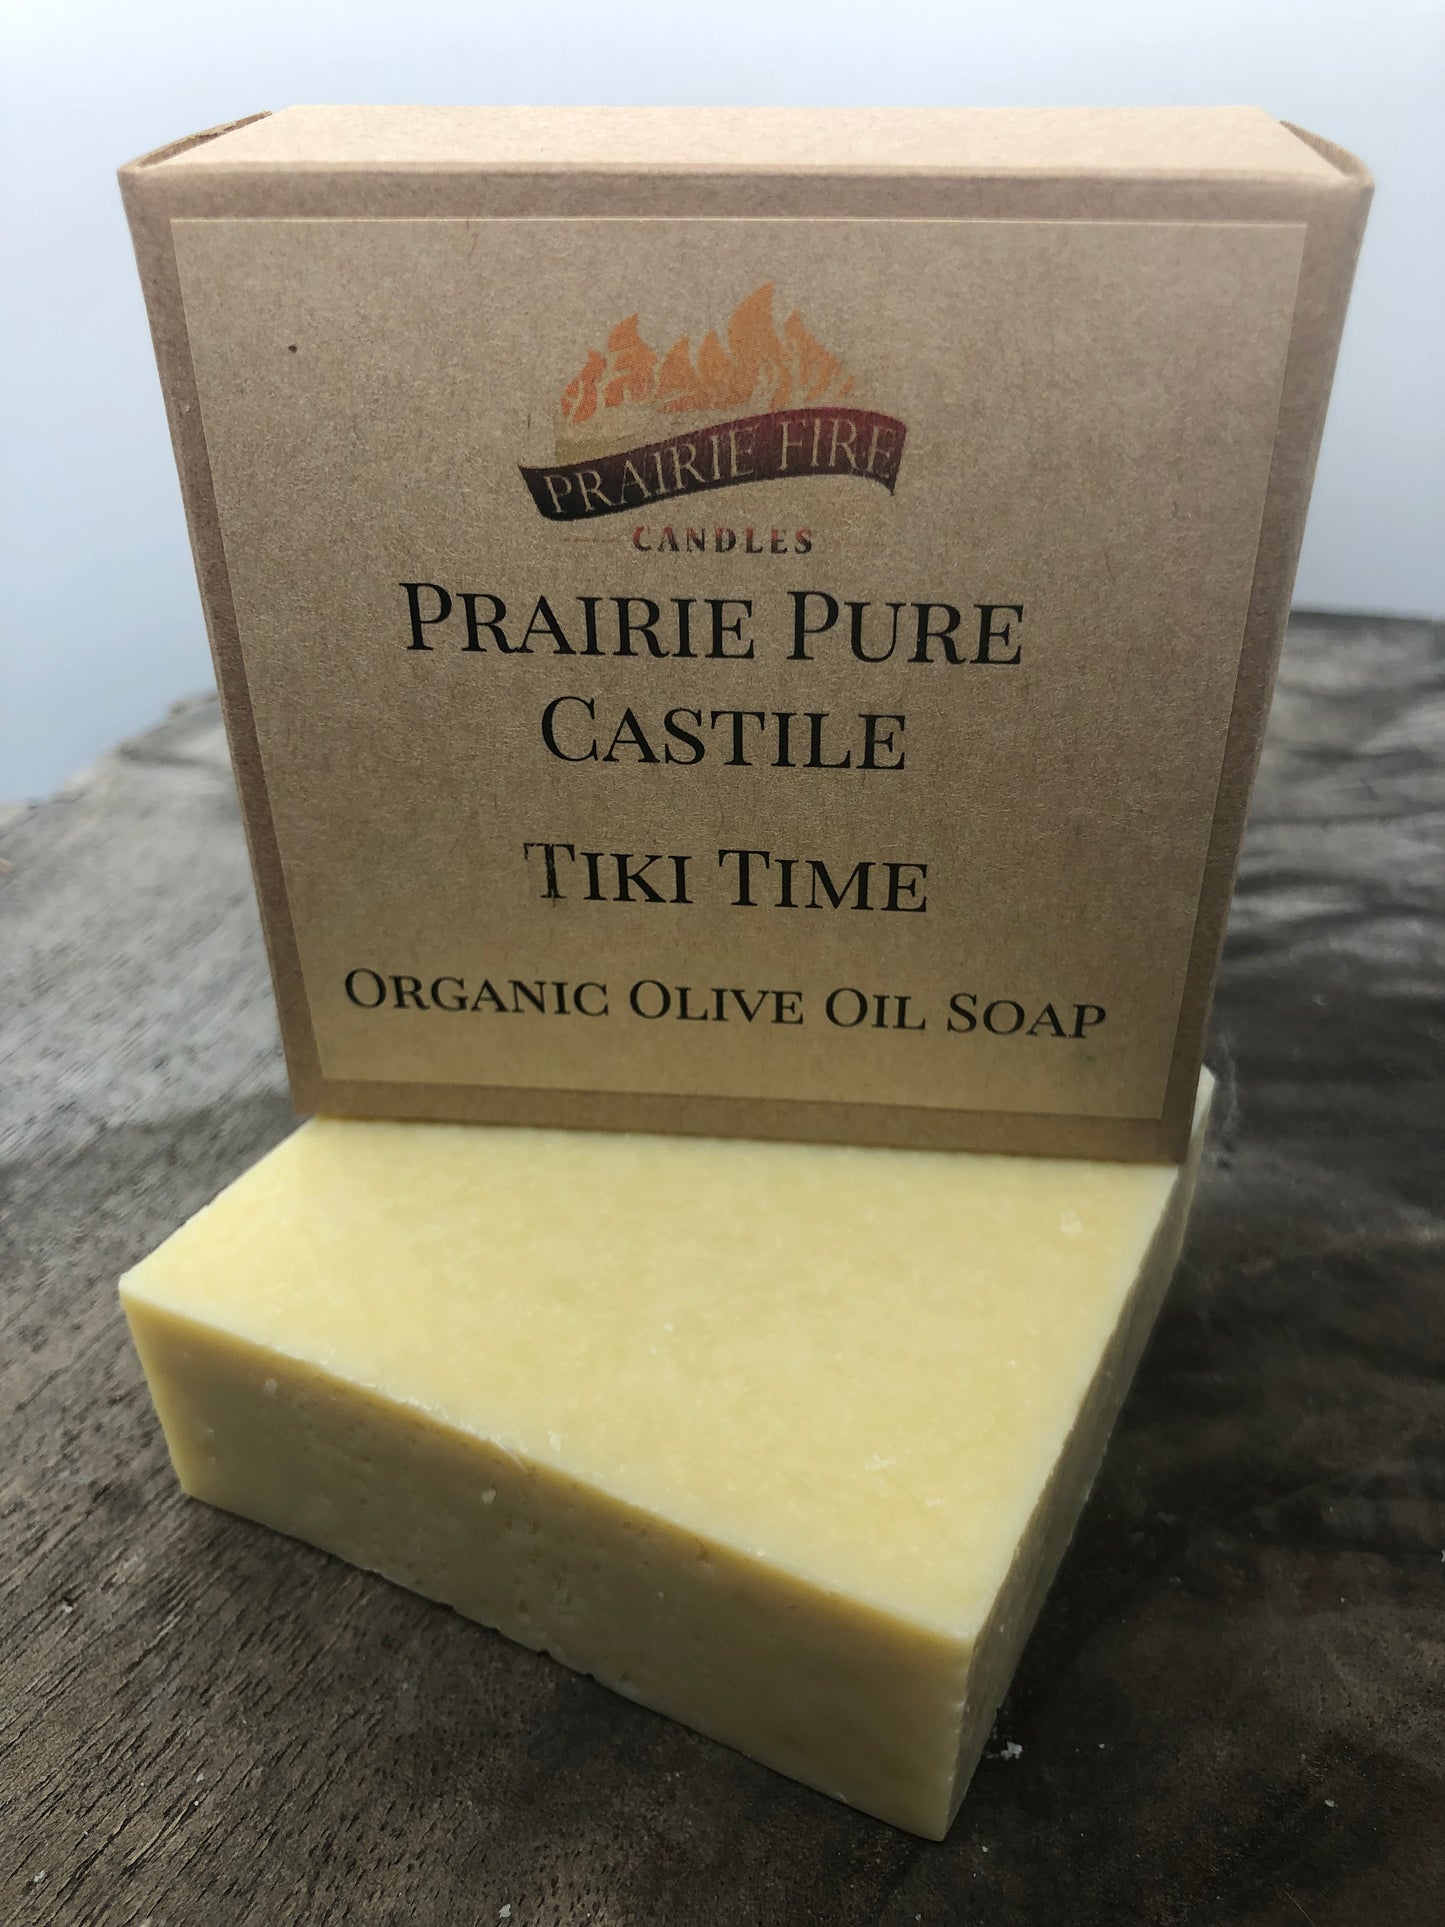 Tiki Time Real Castile Organic Olive Oil Soap for Sensitive Skin - Dye Free - 100% Certified Organic Extra Virgin Olive Oil - Prairie Fire Candles